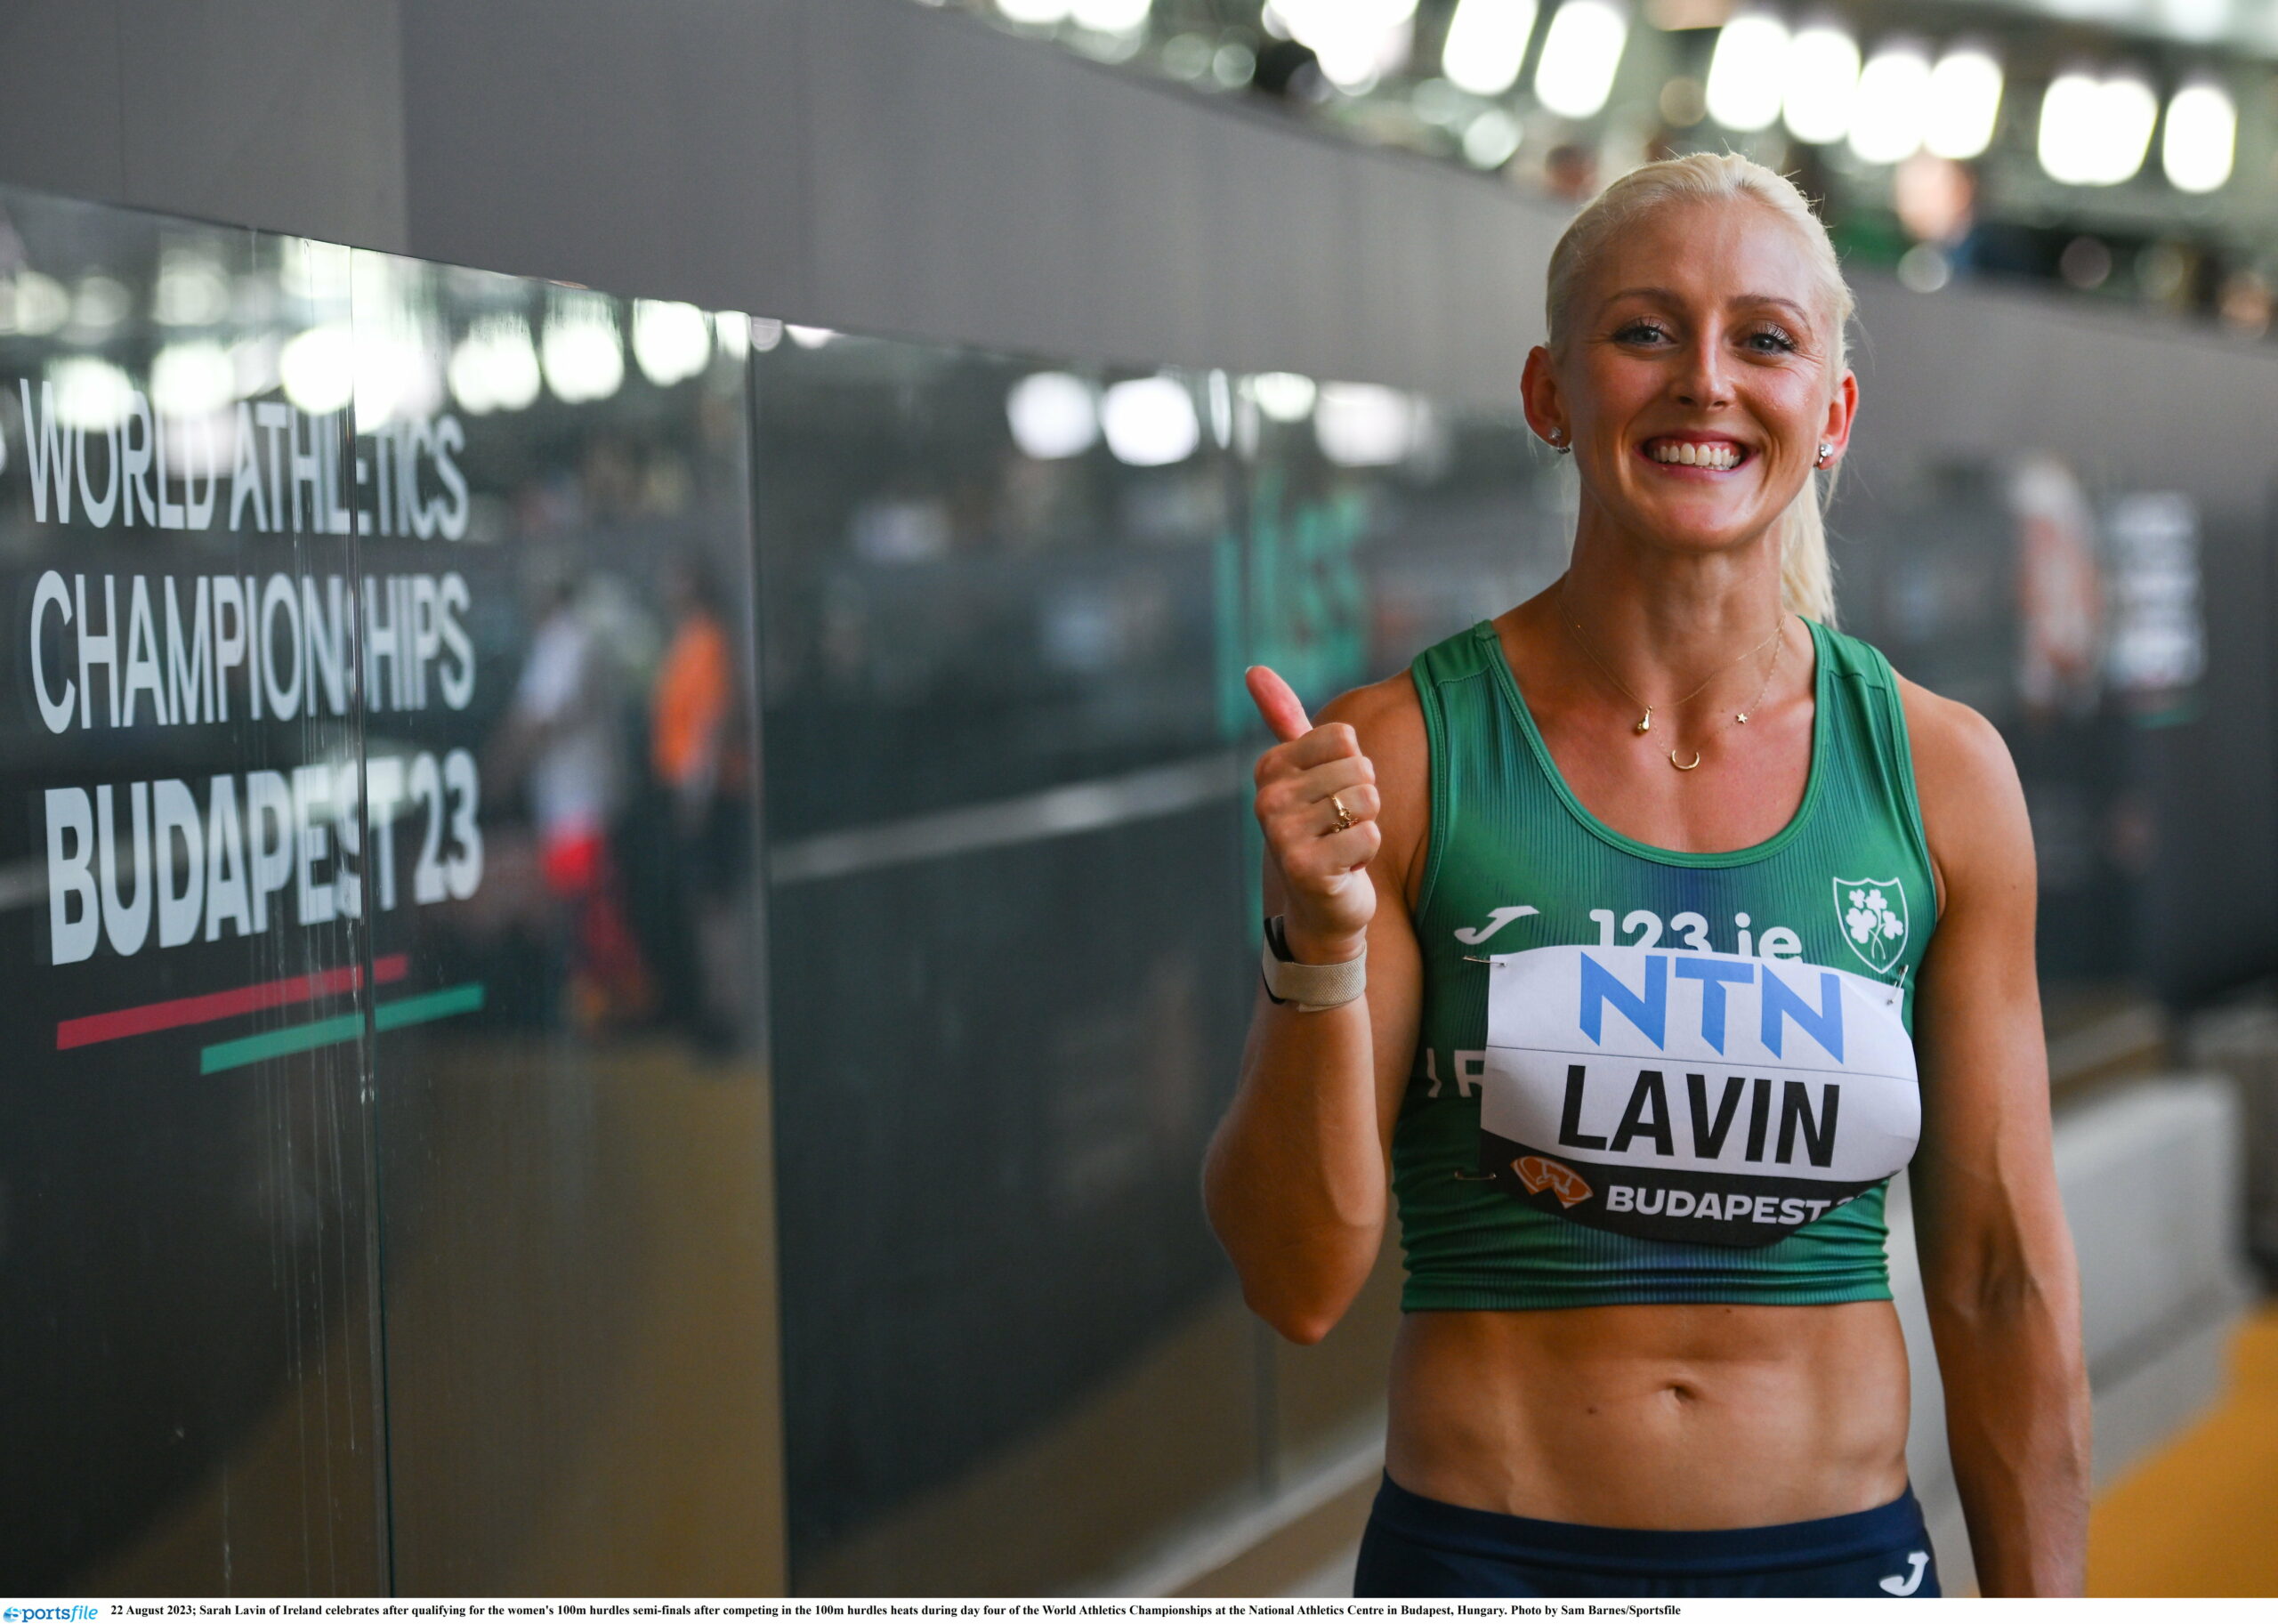 Sarah Lavin breaks Healy’s national 100m record in Switzerland